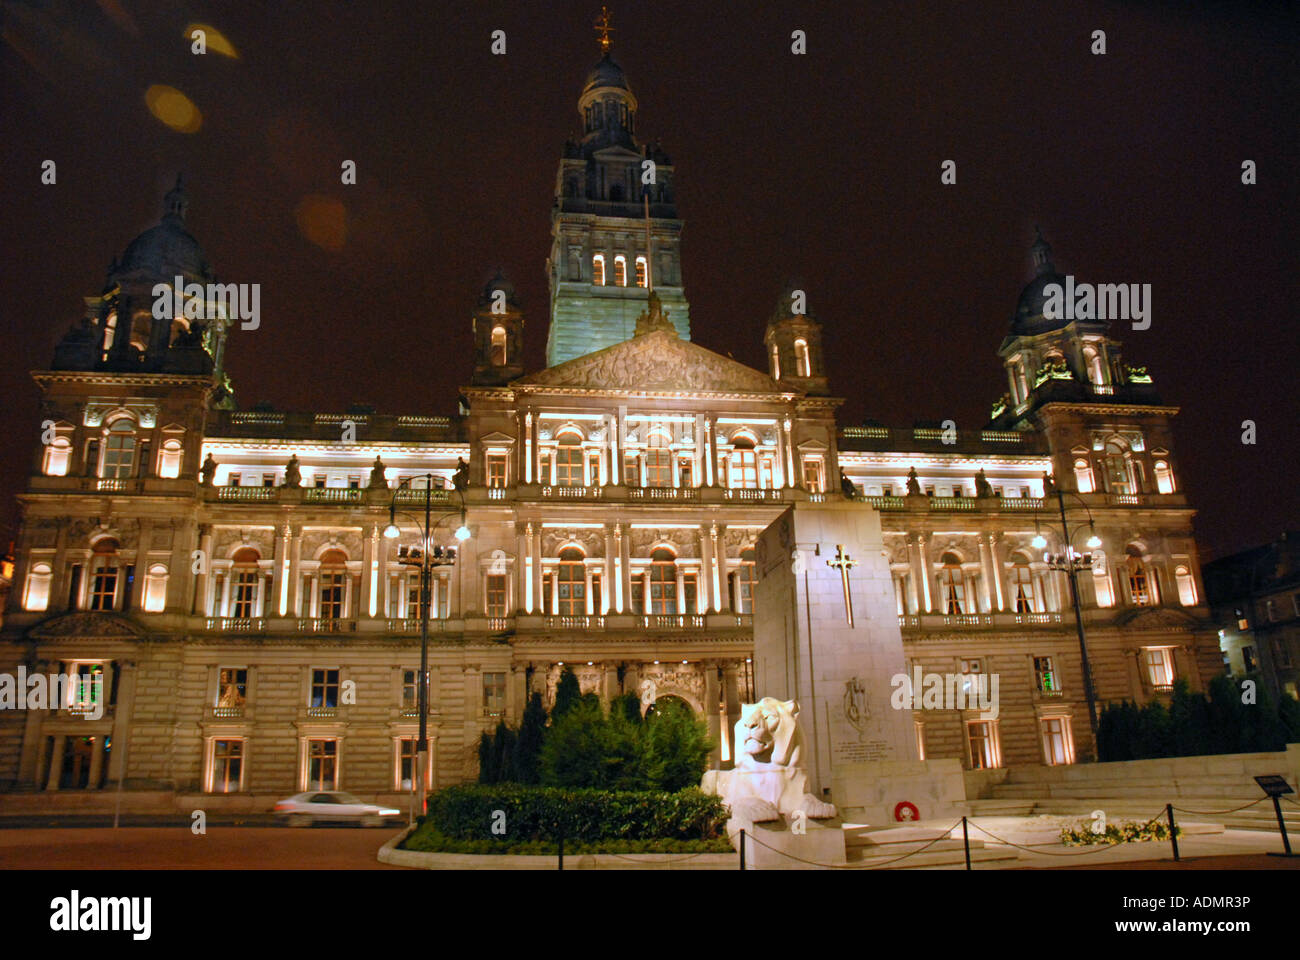 City Chambers and Cenotaph at night. George Square, Central Glasgow. Strathclyde. Scotland. Christmas Eve, 2006. Stock Photo